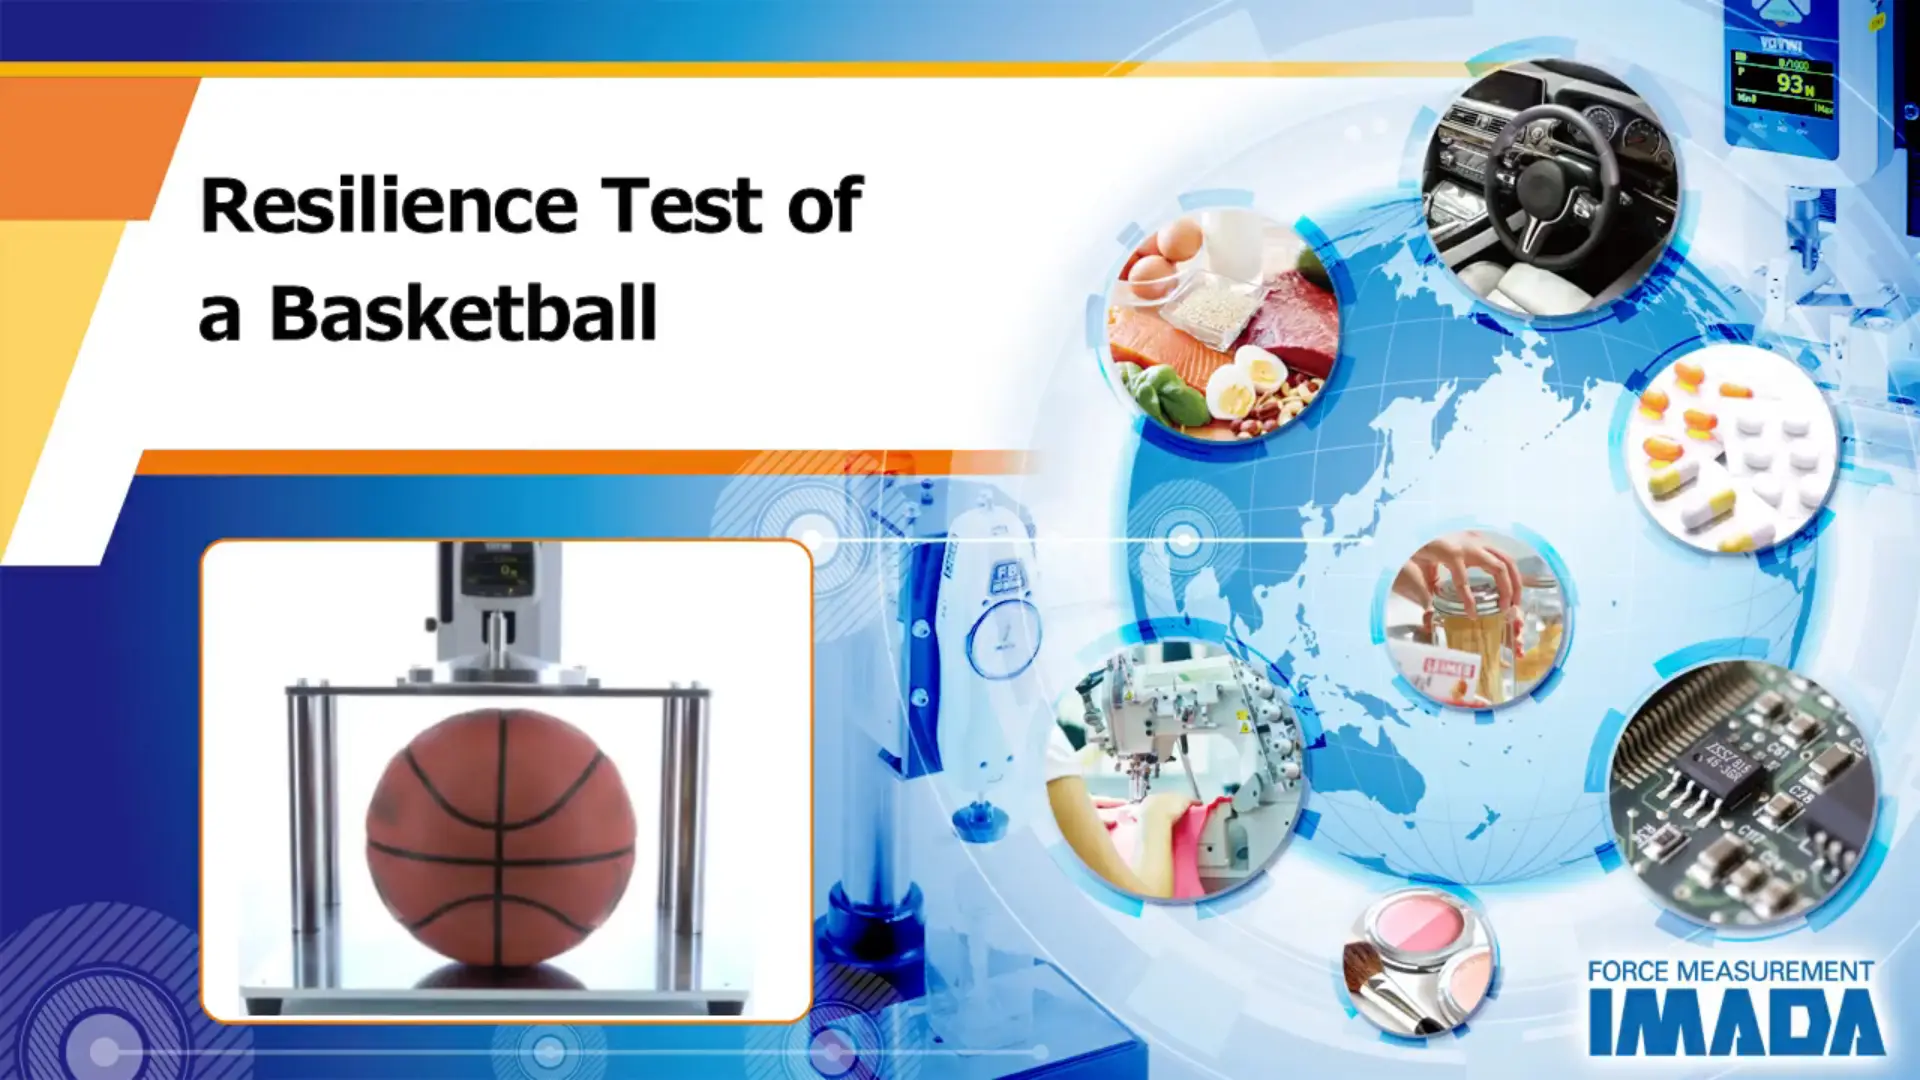 Resilience test of a basketball